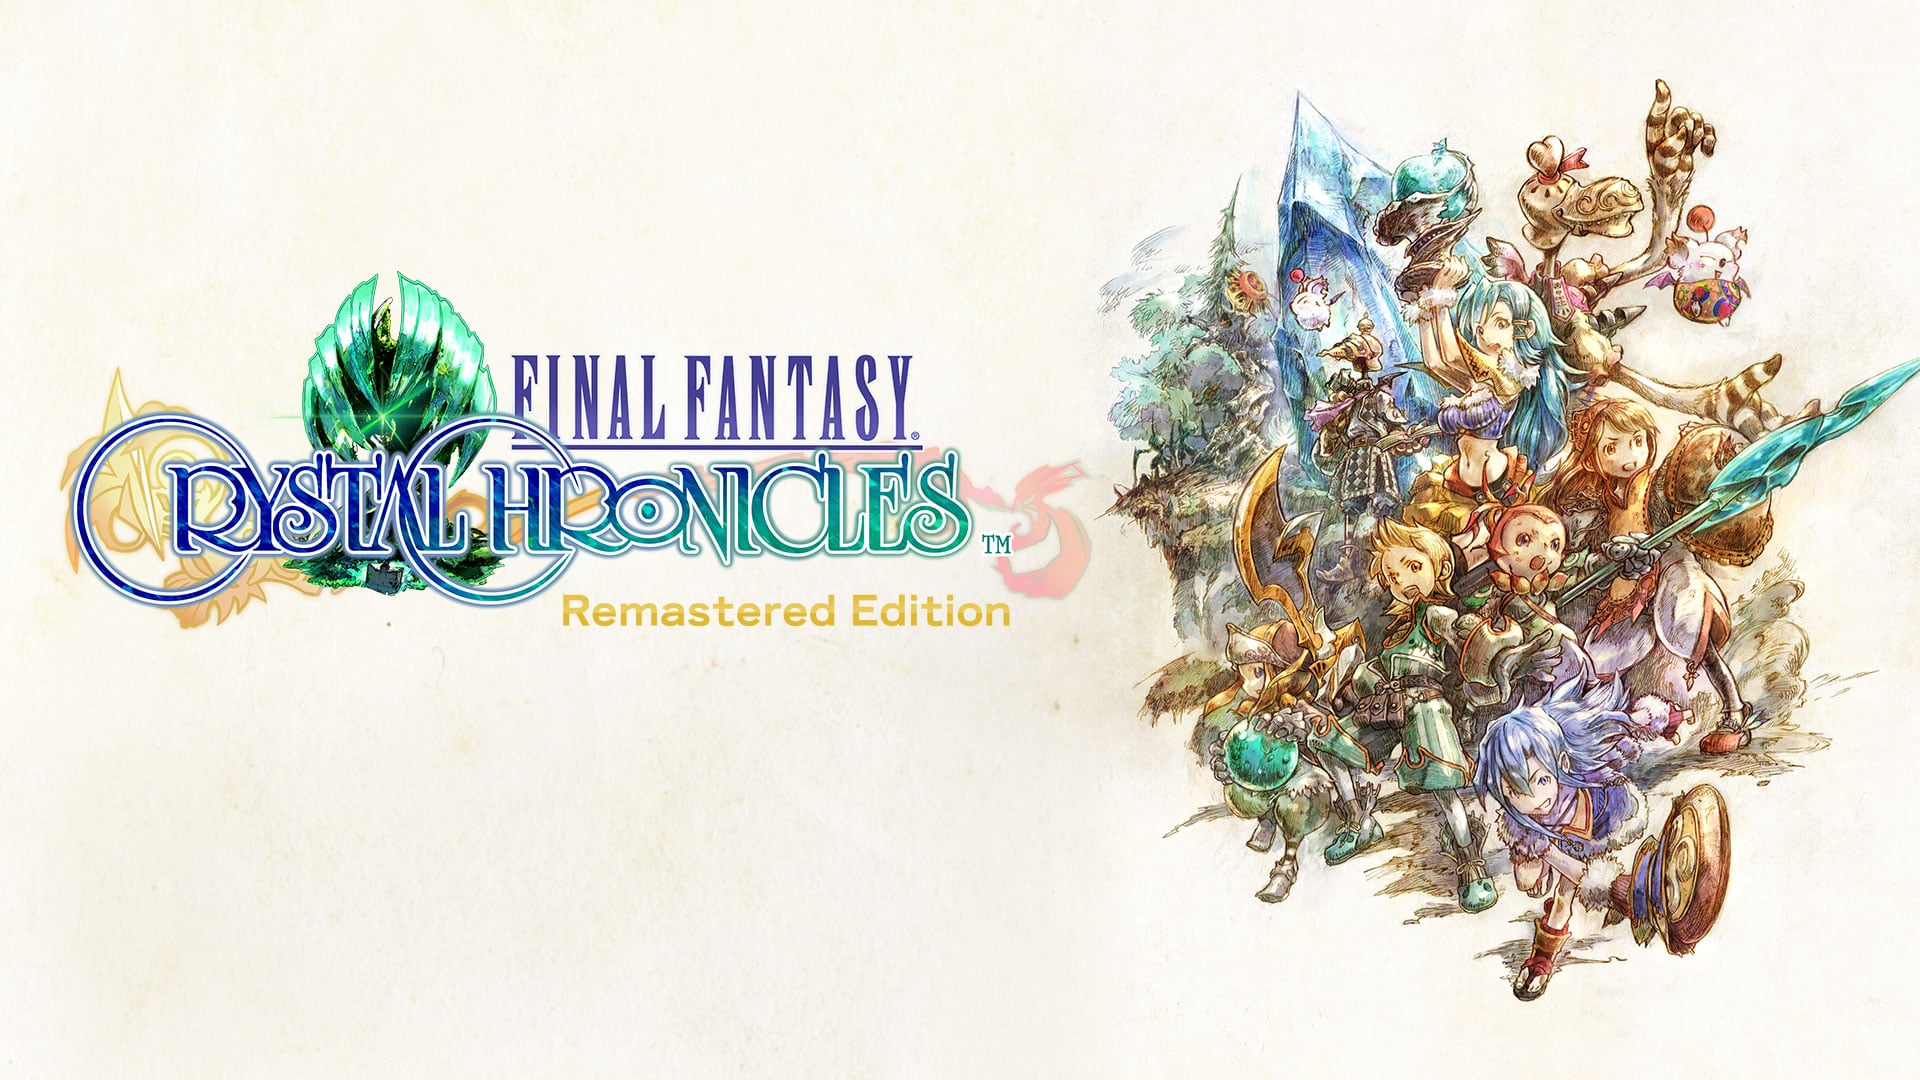 Final Fantasy Crystal Chronicles Remastered Edition, GamersRD